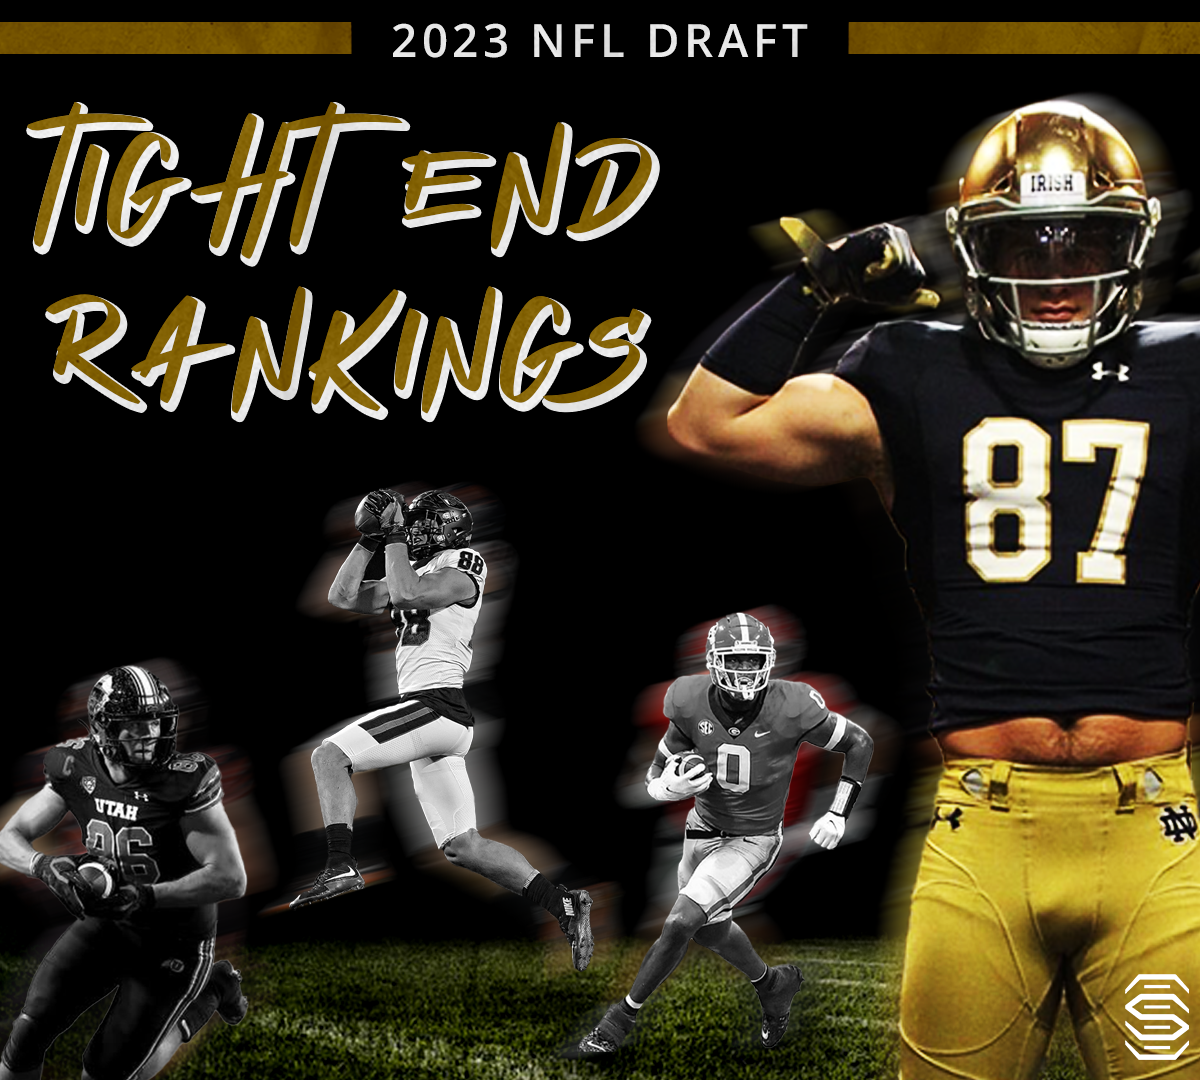 2023 NFL Draft tight end rankings: Michael Mayer is No. 1 in